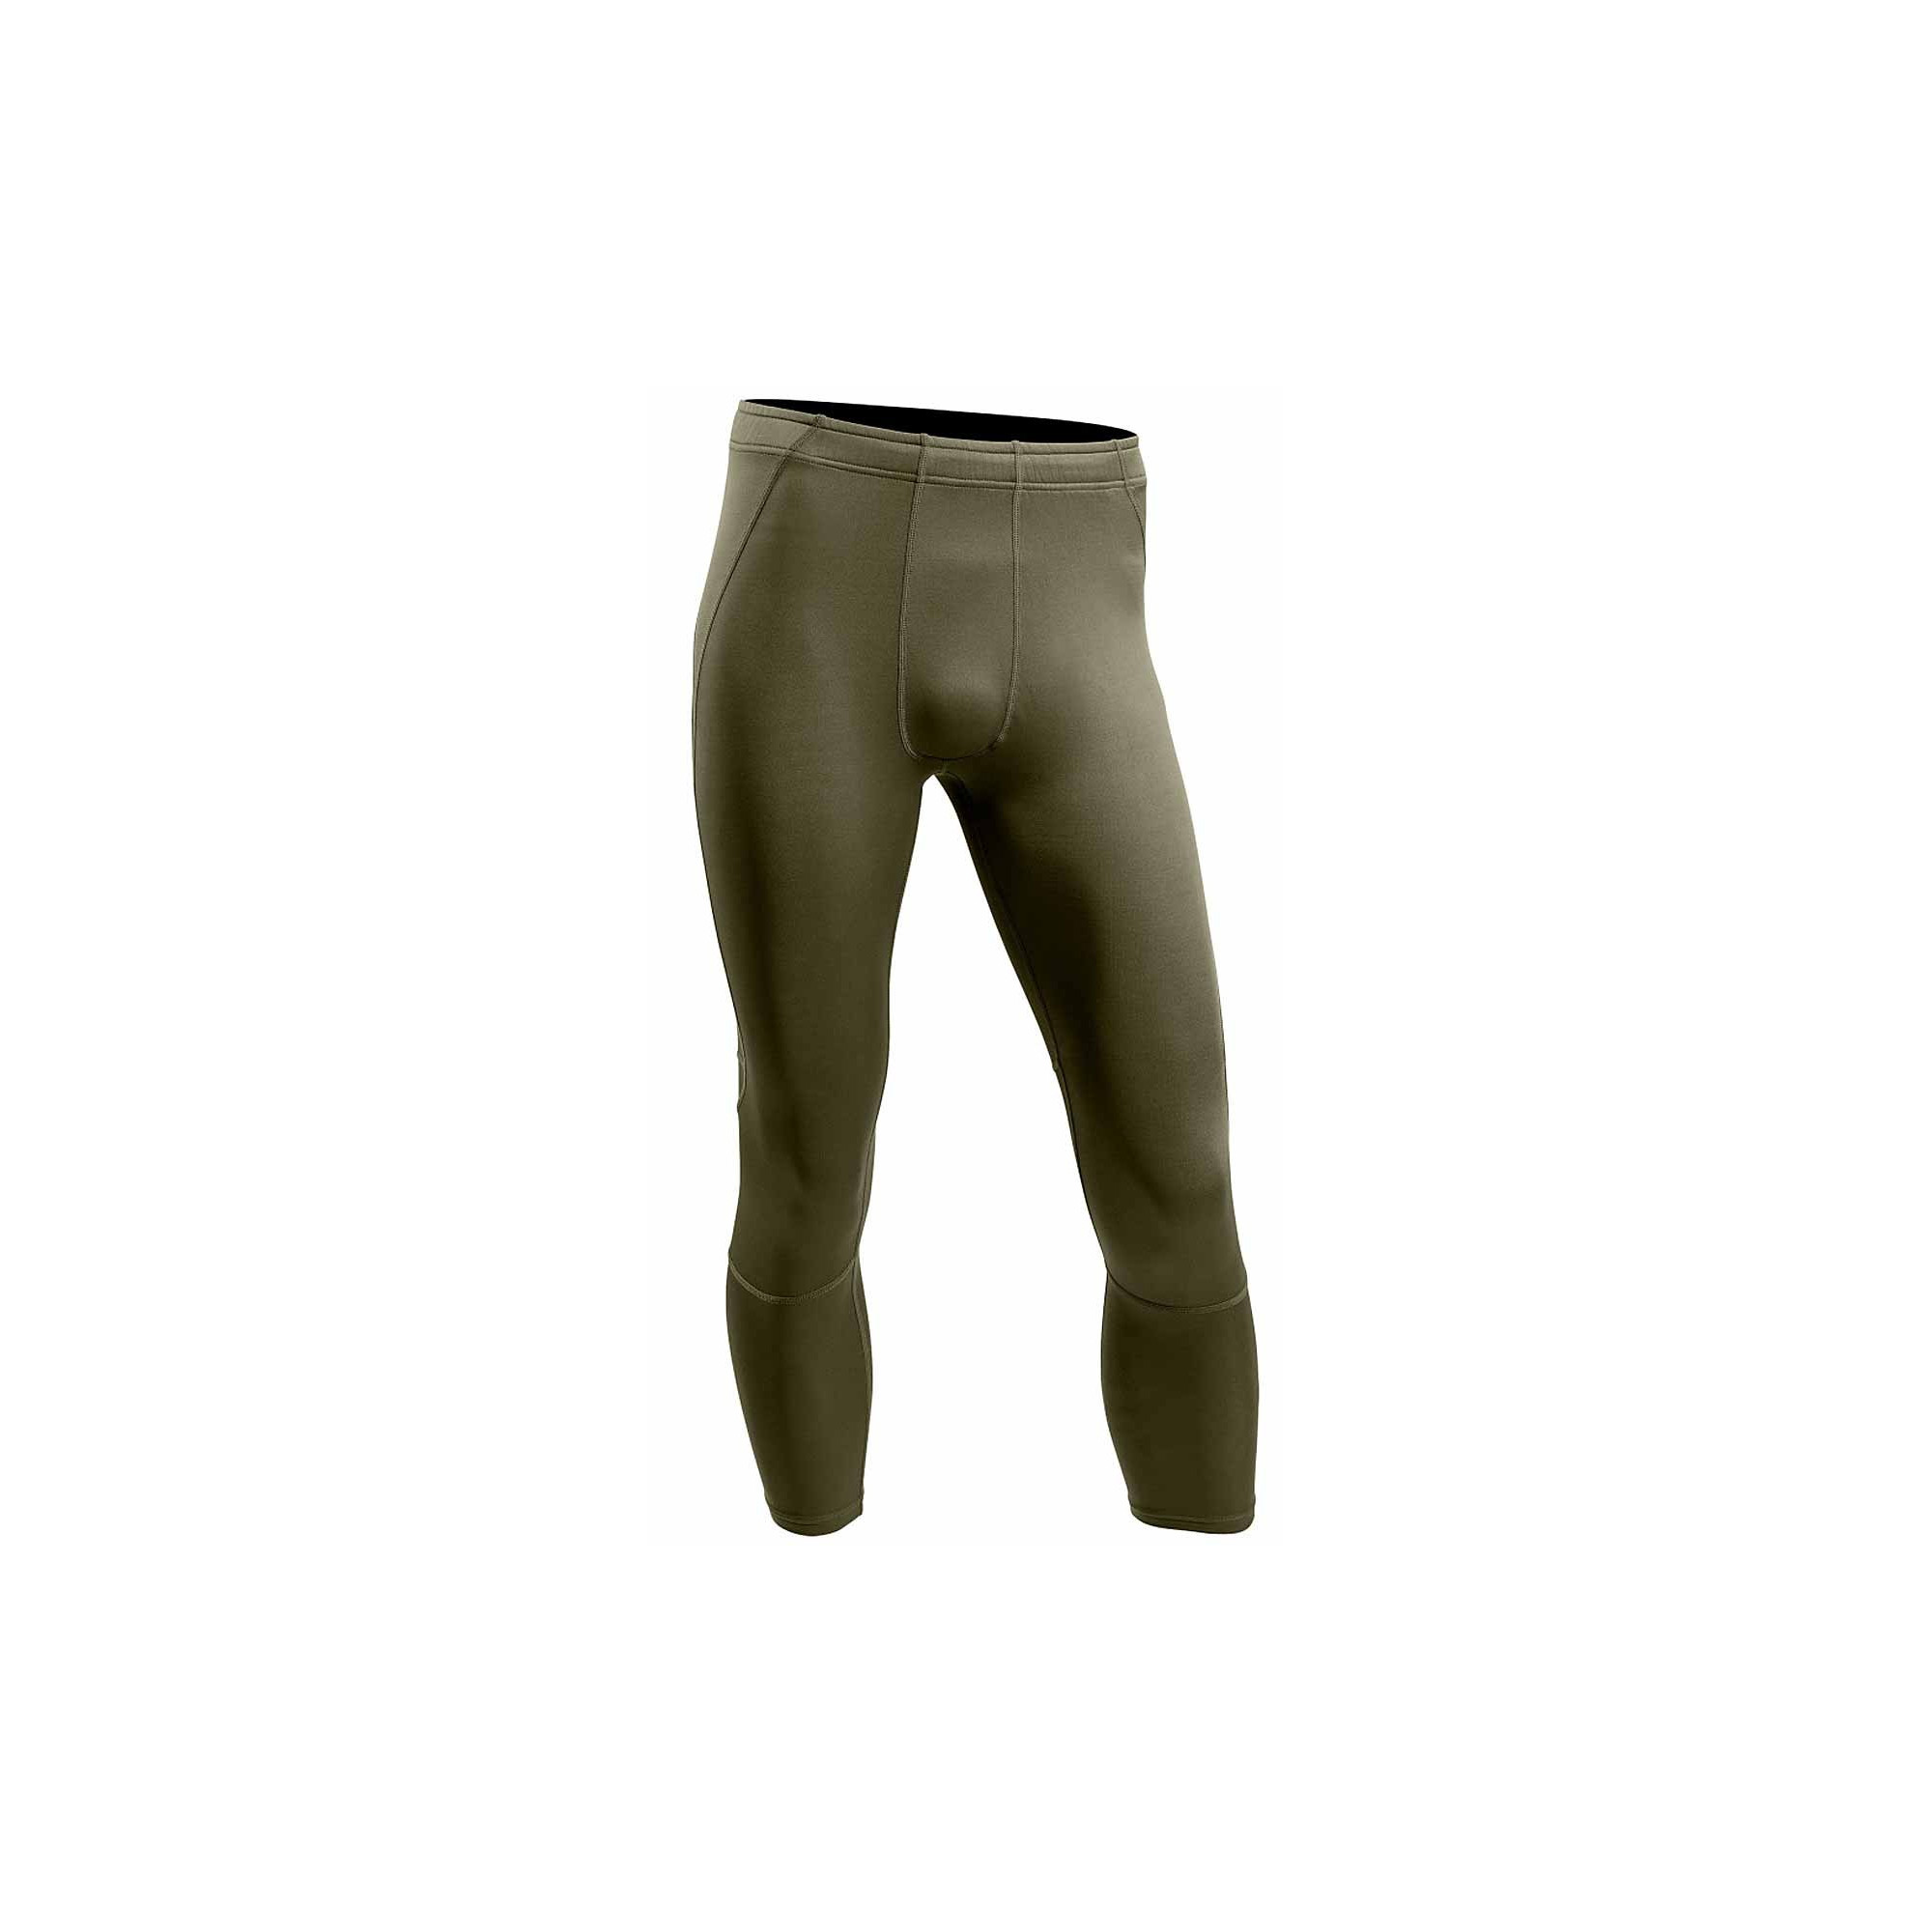 Collant Thermo Performer vert olive